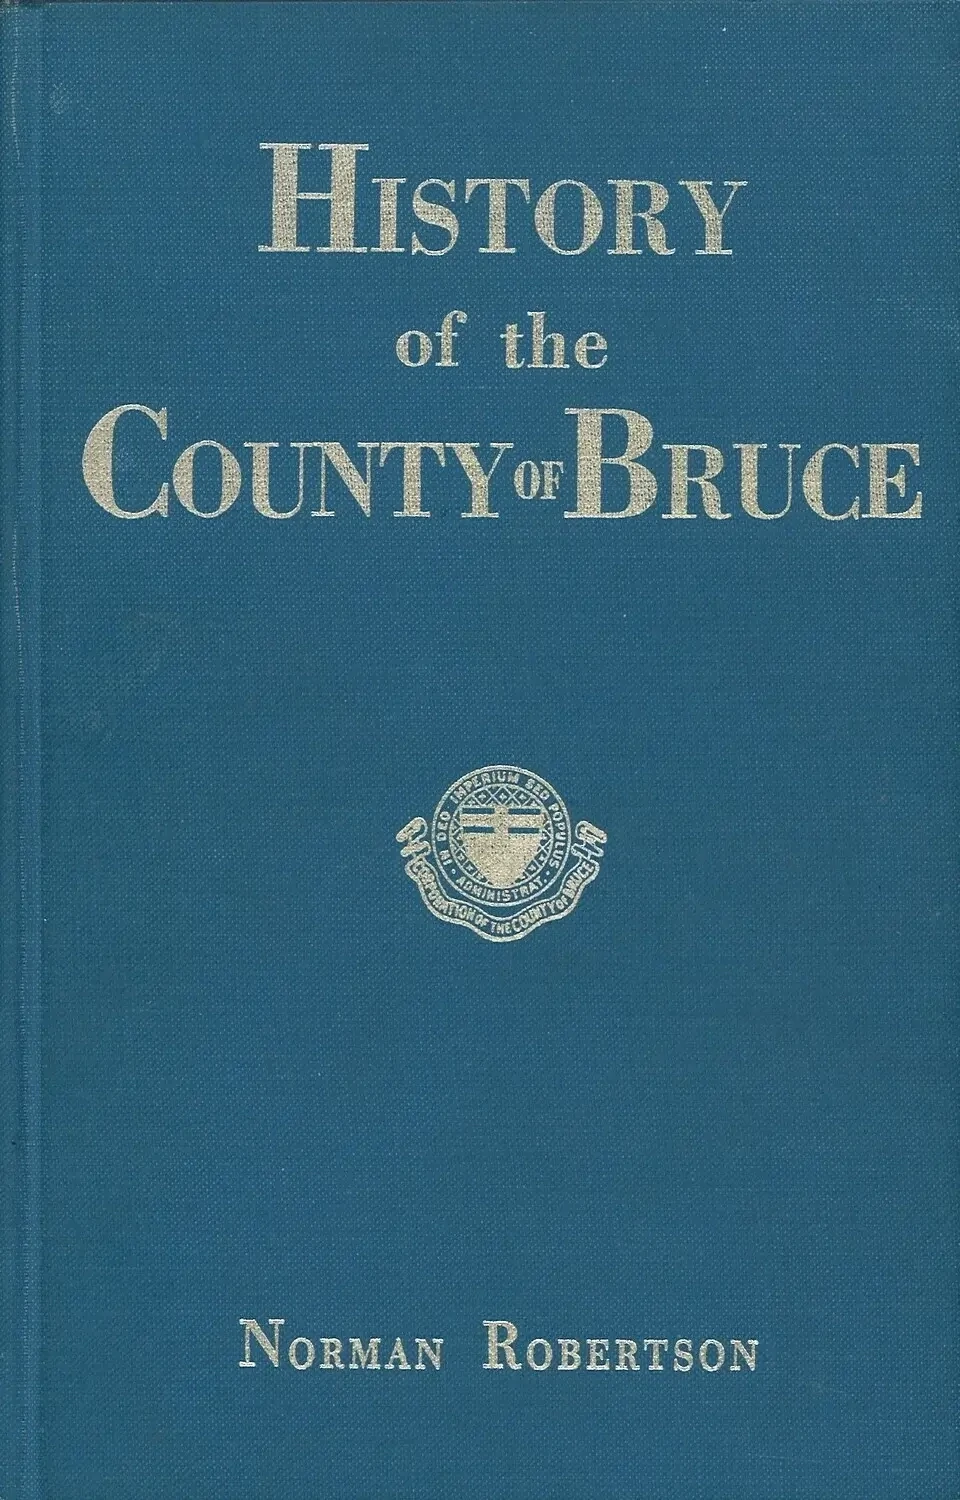 History of the County of Bruce 3rd Ed. by Norman Robertson